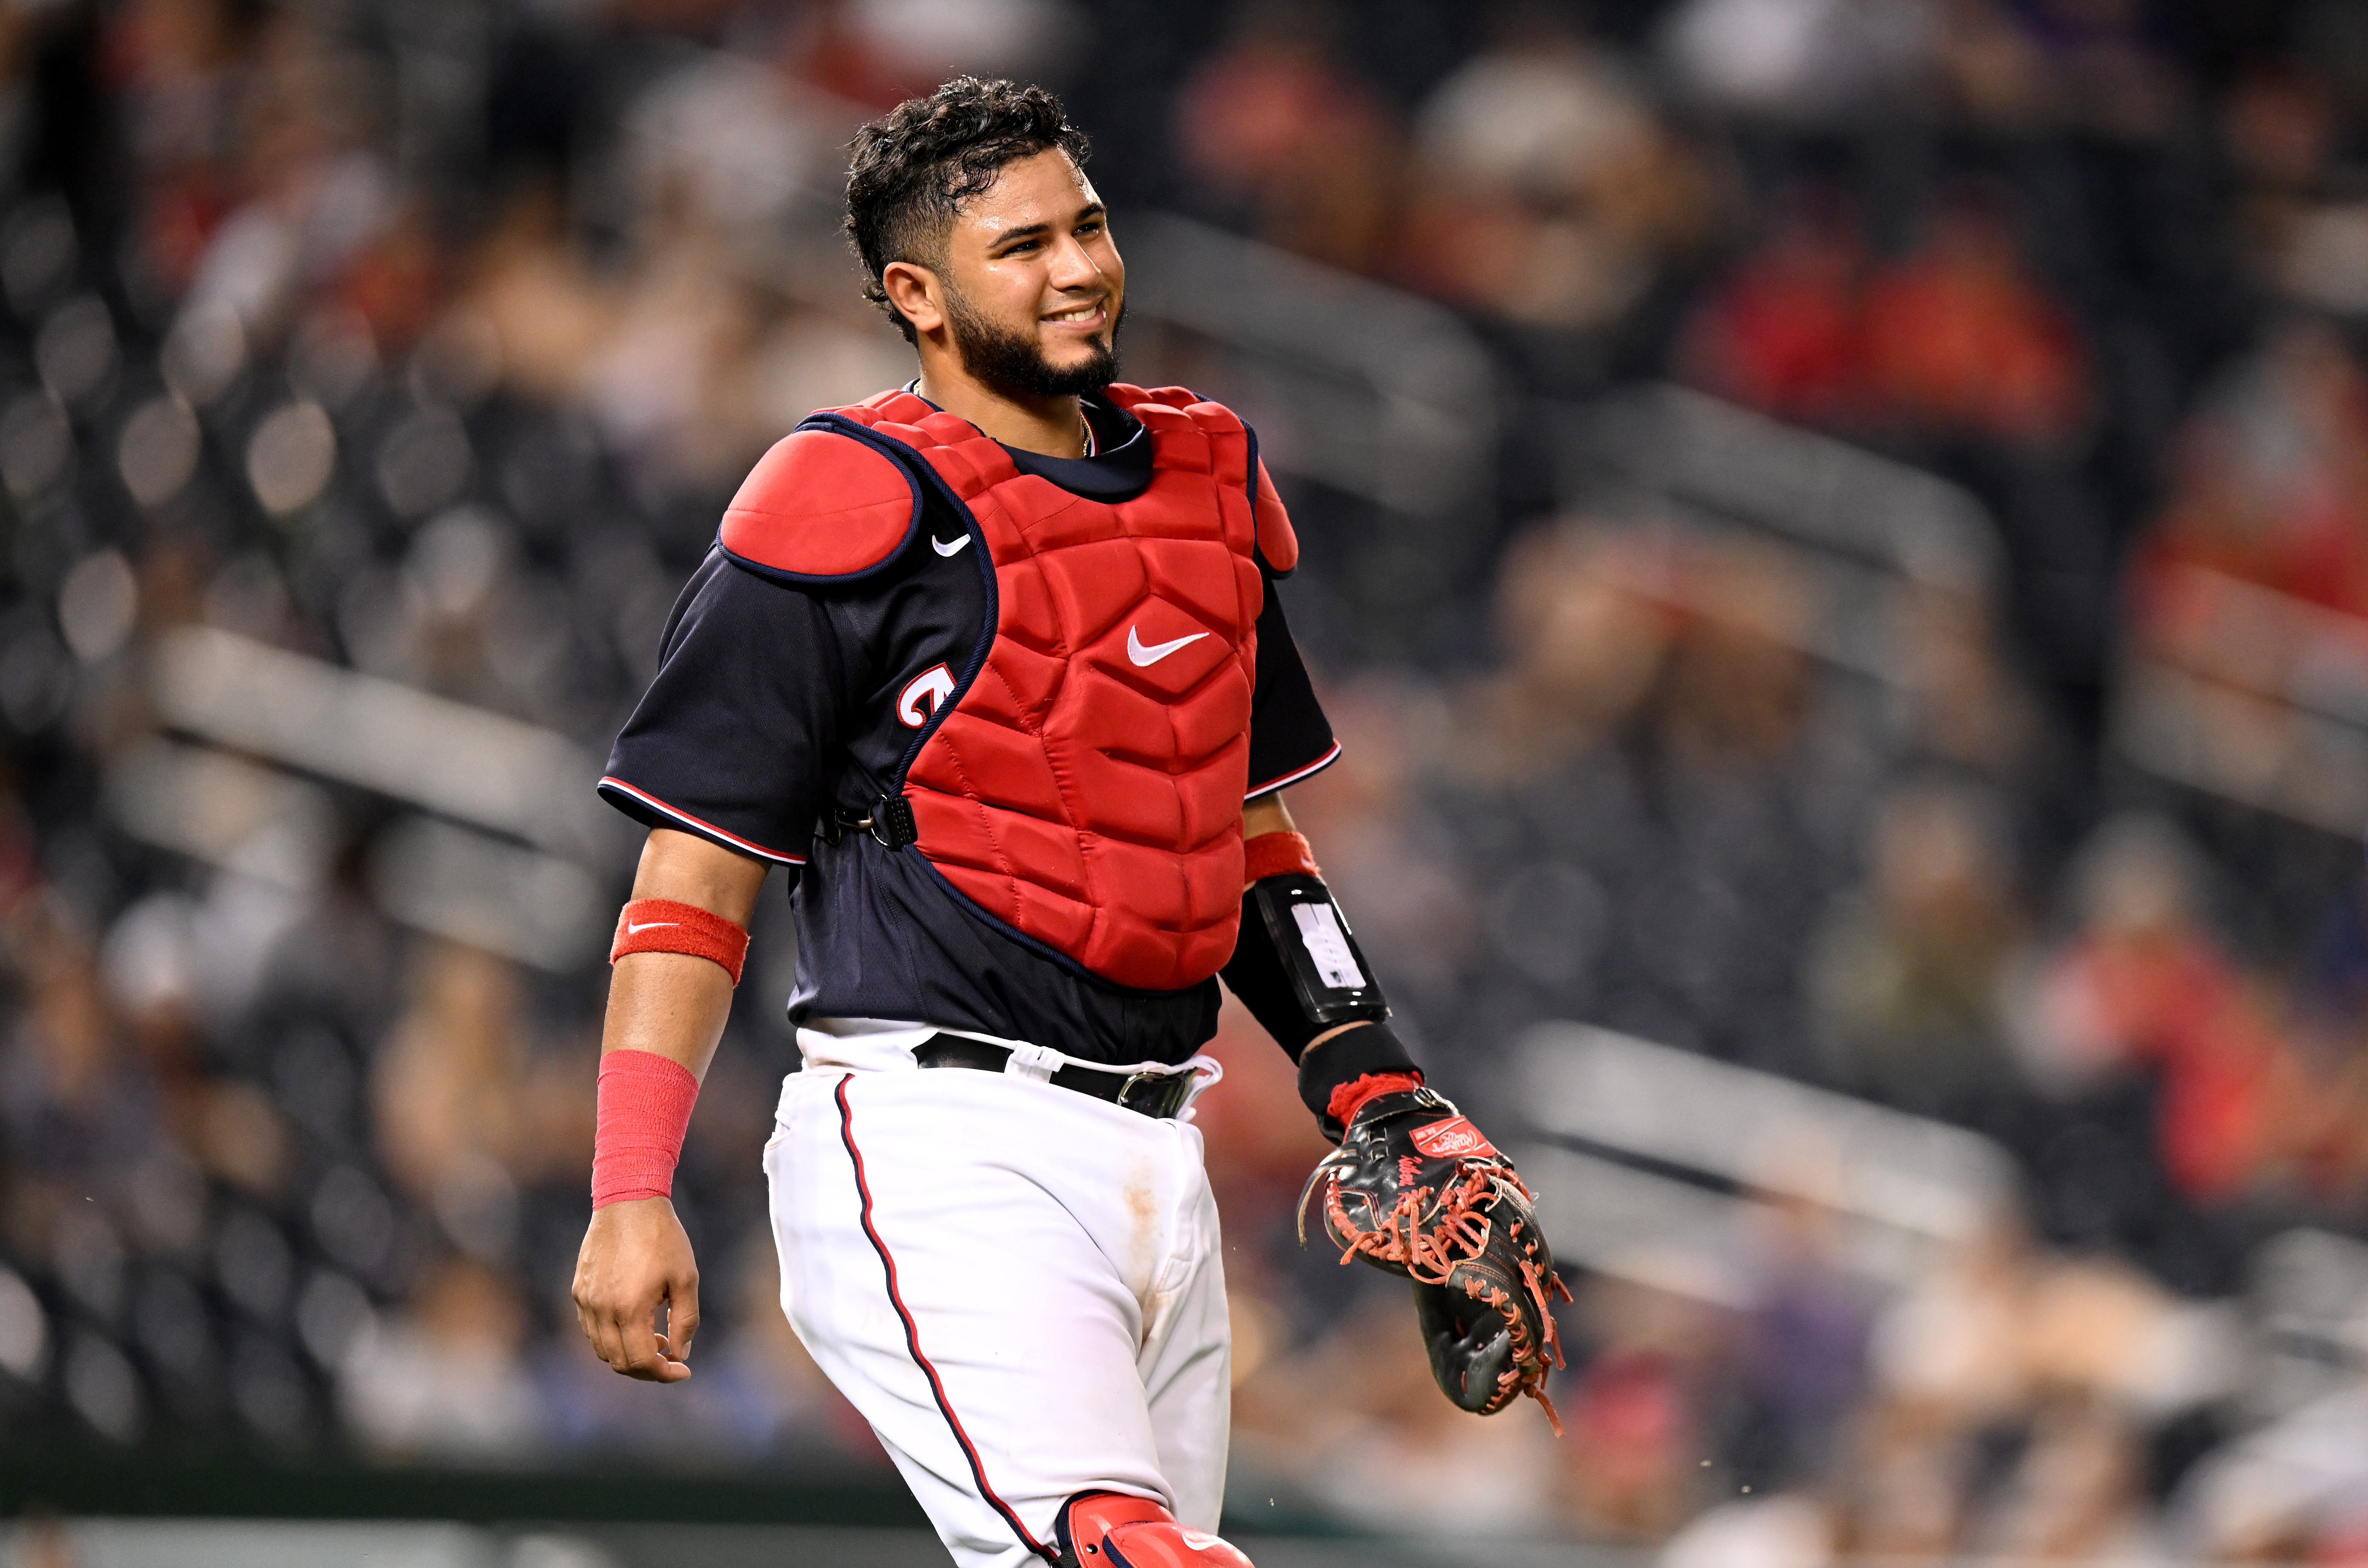 Source: Nats to announce 8-year, $50 million extension with Ruiz